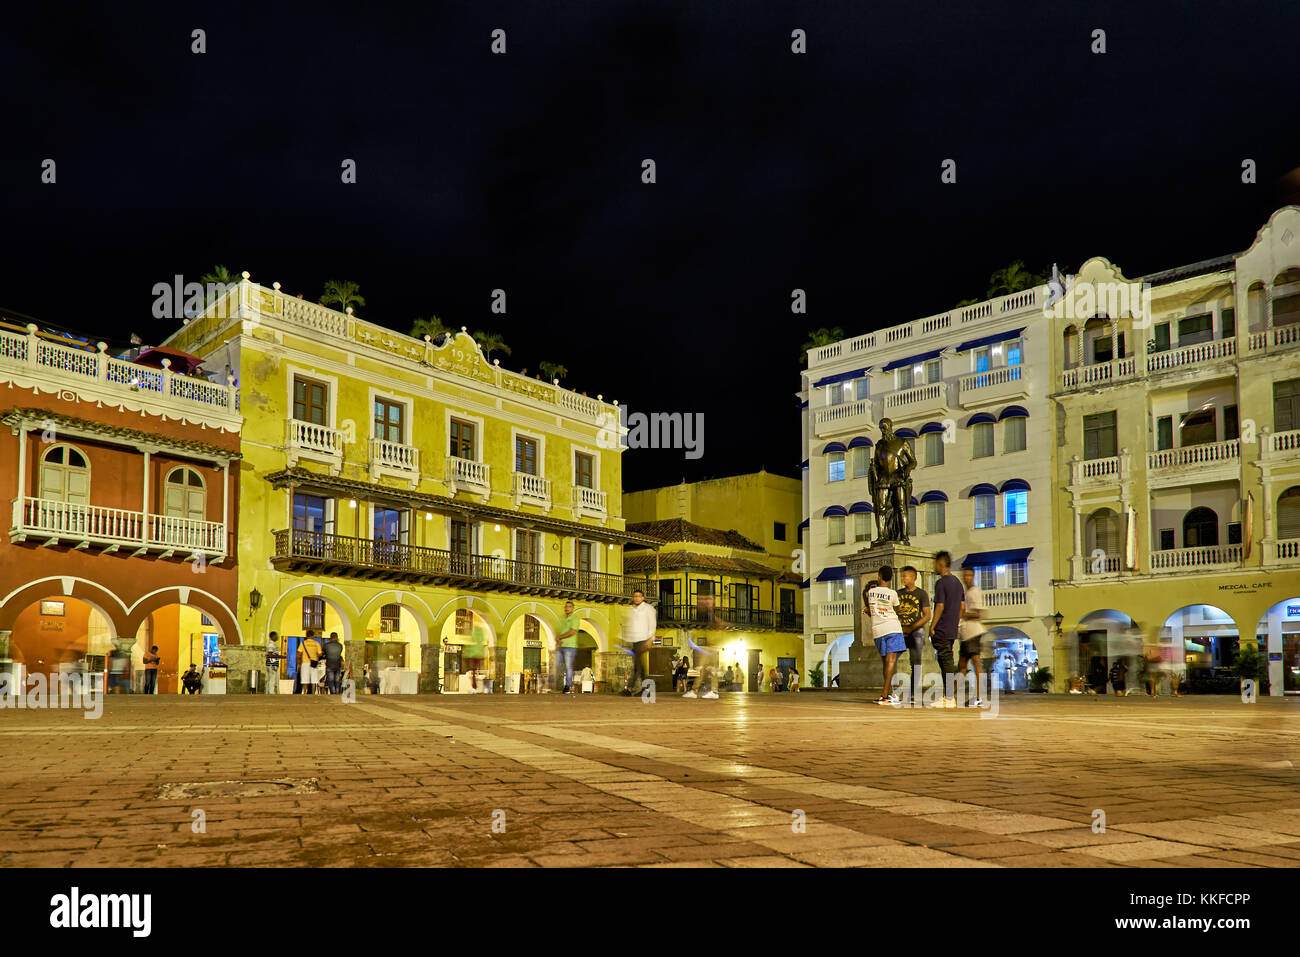 typical colorful facades with balconys of houses at Plaza de Los Coches, Cartagena de Indias, Colombia, South America Stock Photo